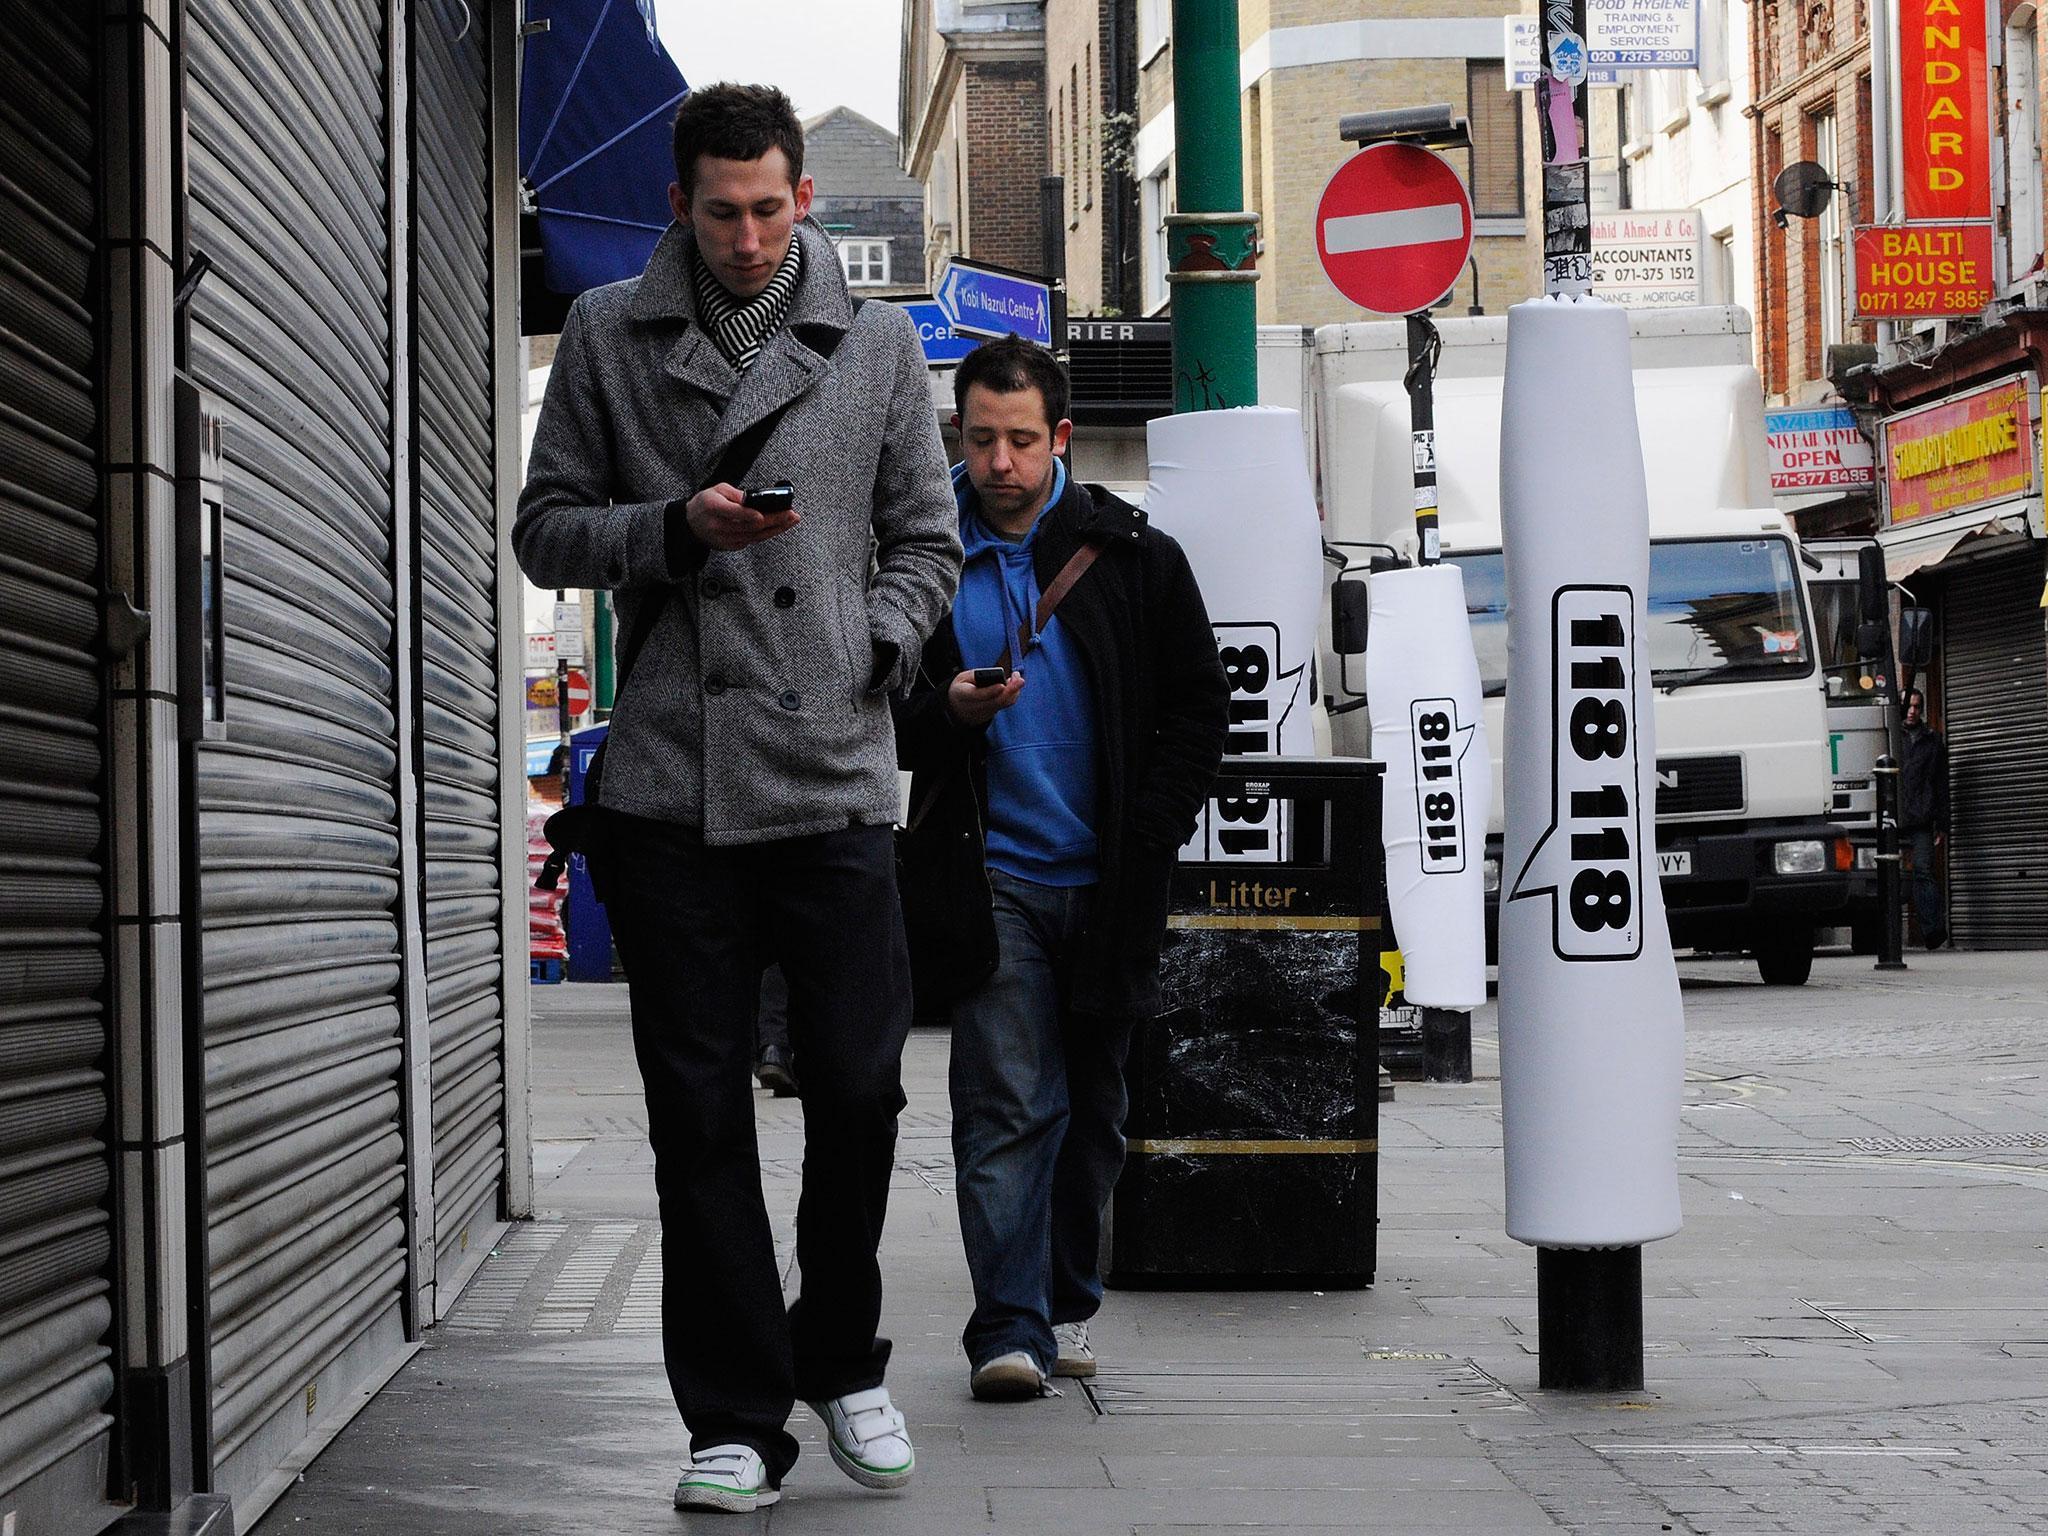 London experimented with padded lamp posts in Brick Lane's ‘Safe Text’ street